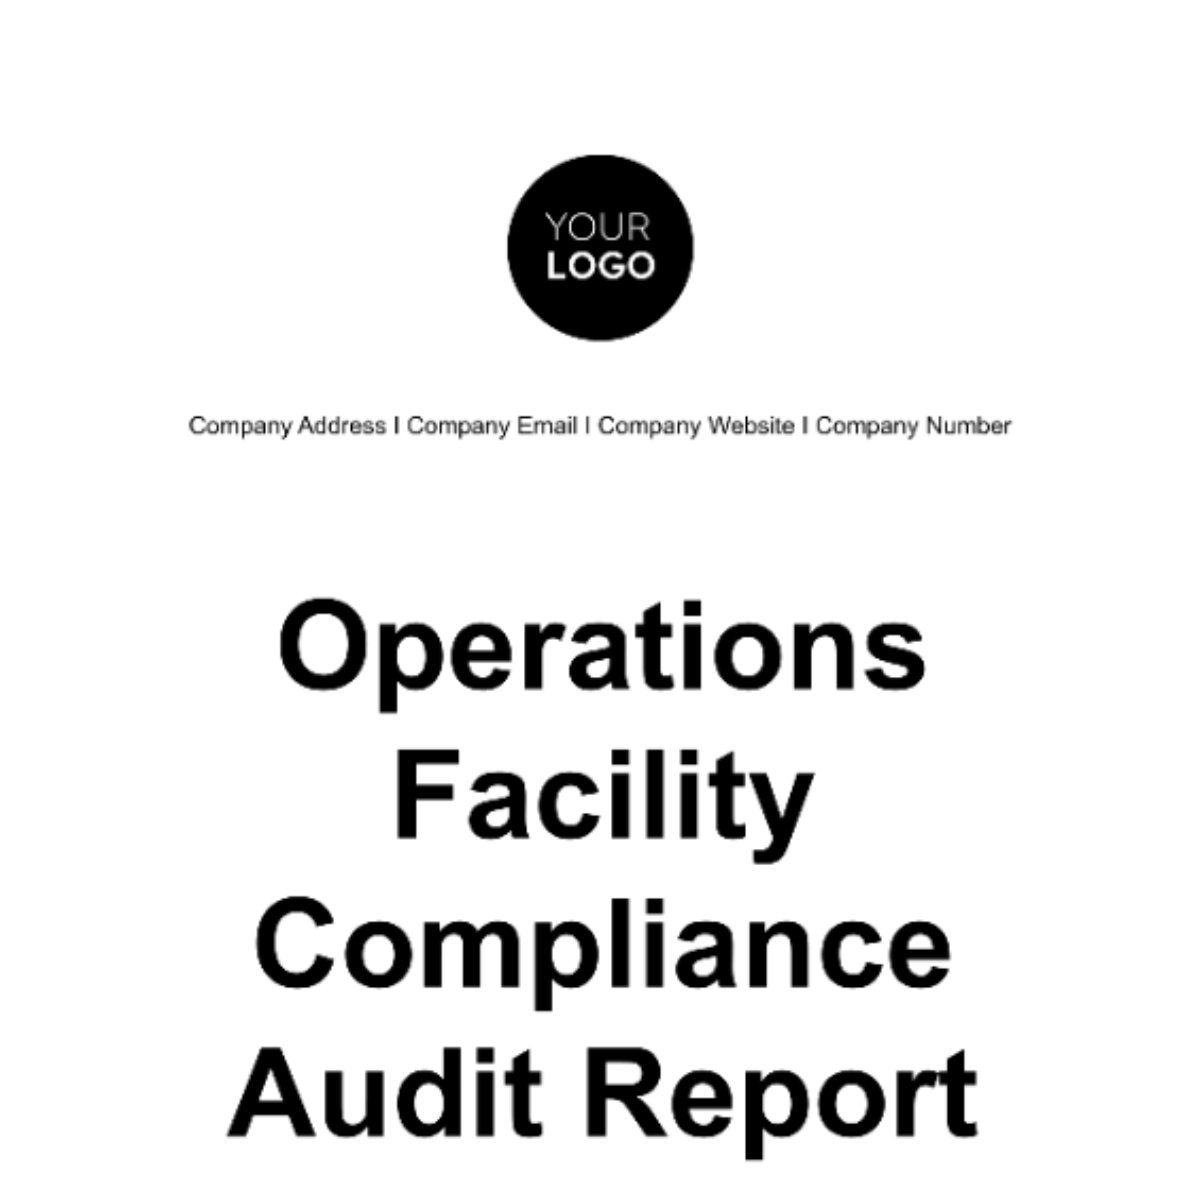 Operations Facility Compliance Audit Report Template